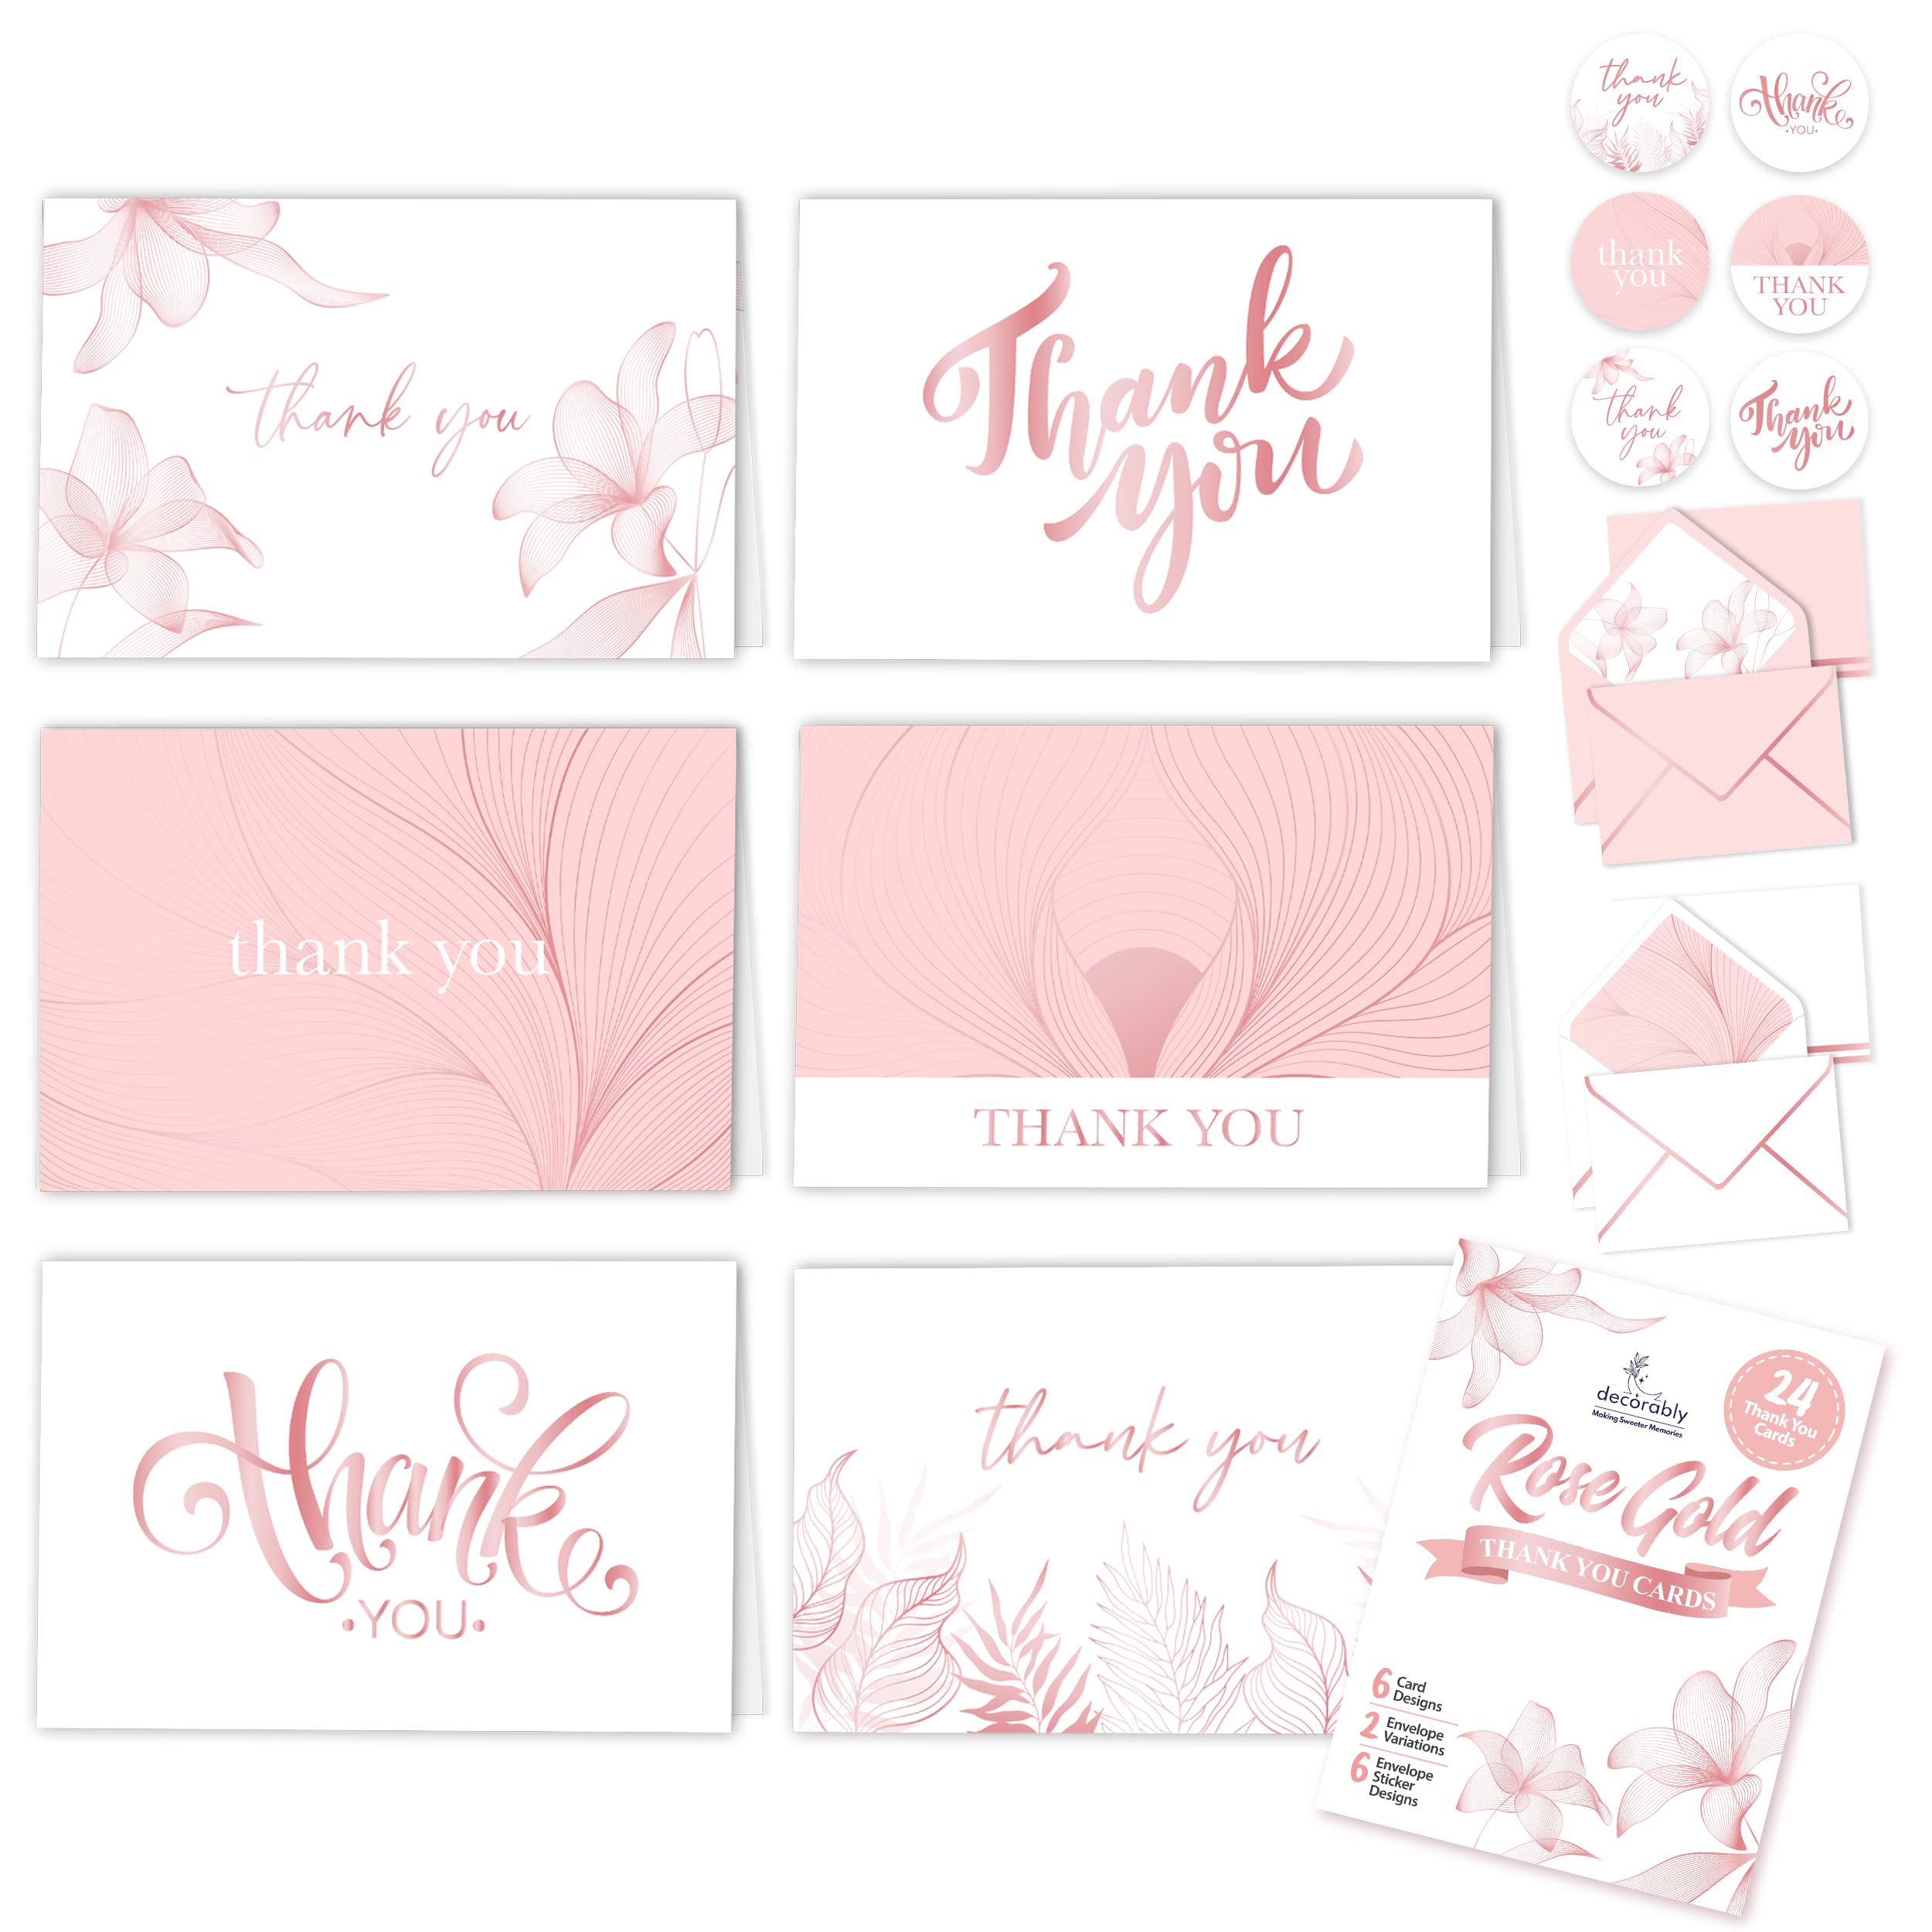 24 Rose Gold-Foiled Pink Thank You Cards with Envelopes - 6x4in Rose Gold Thank You Cards with Envelopes Pink, 6 Designs Pink Baby Shower Thank You Cards Girl, Girl Baby Shower Thank You Cards Pink